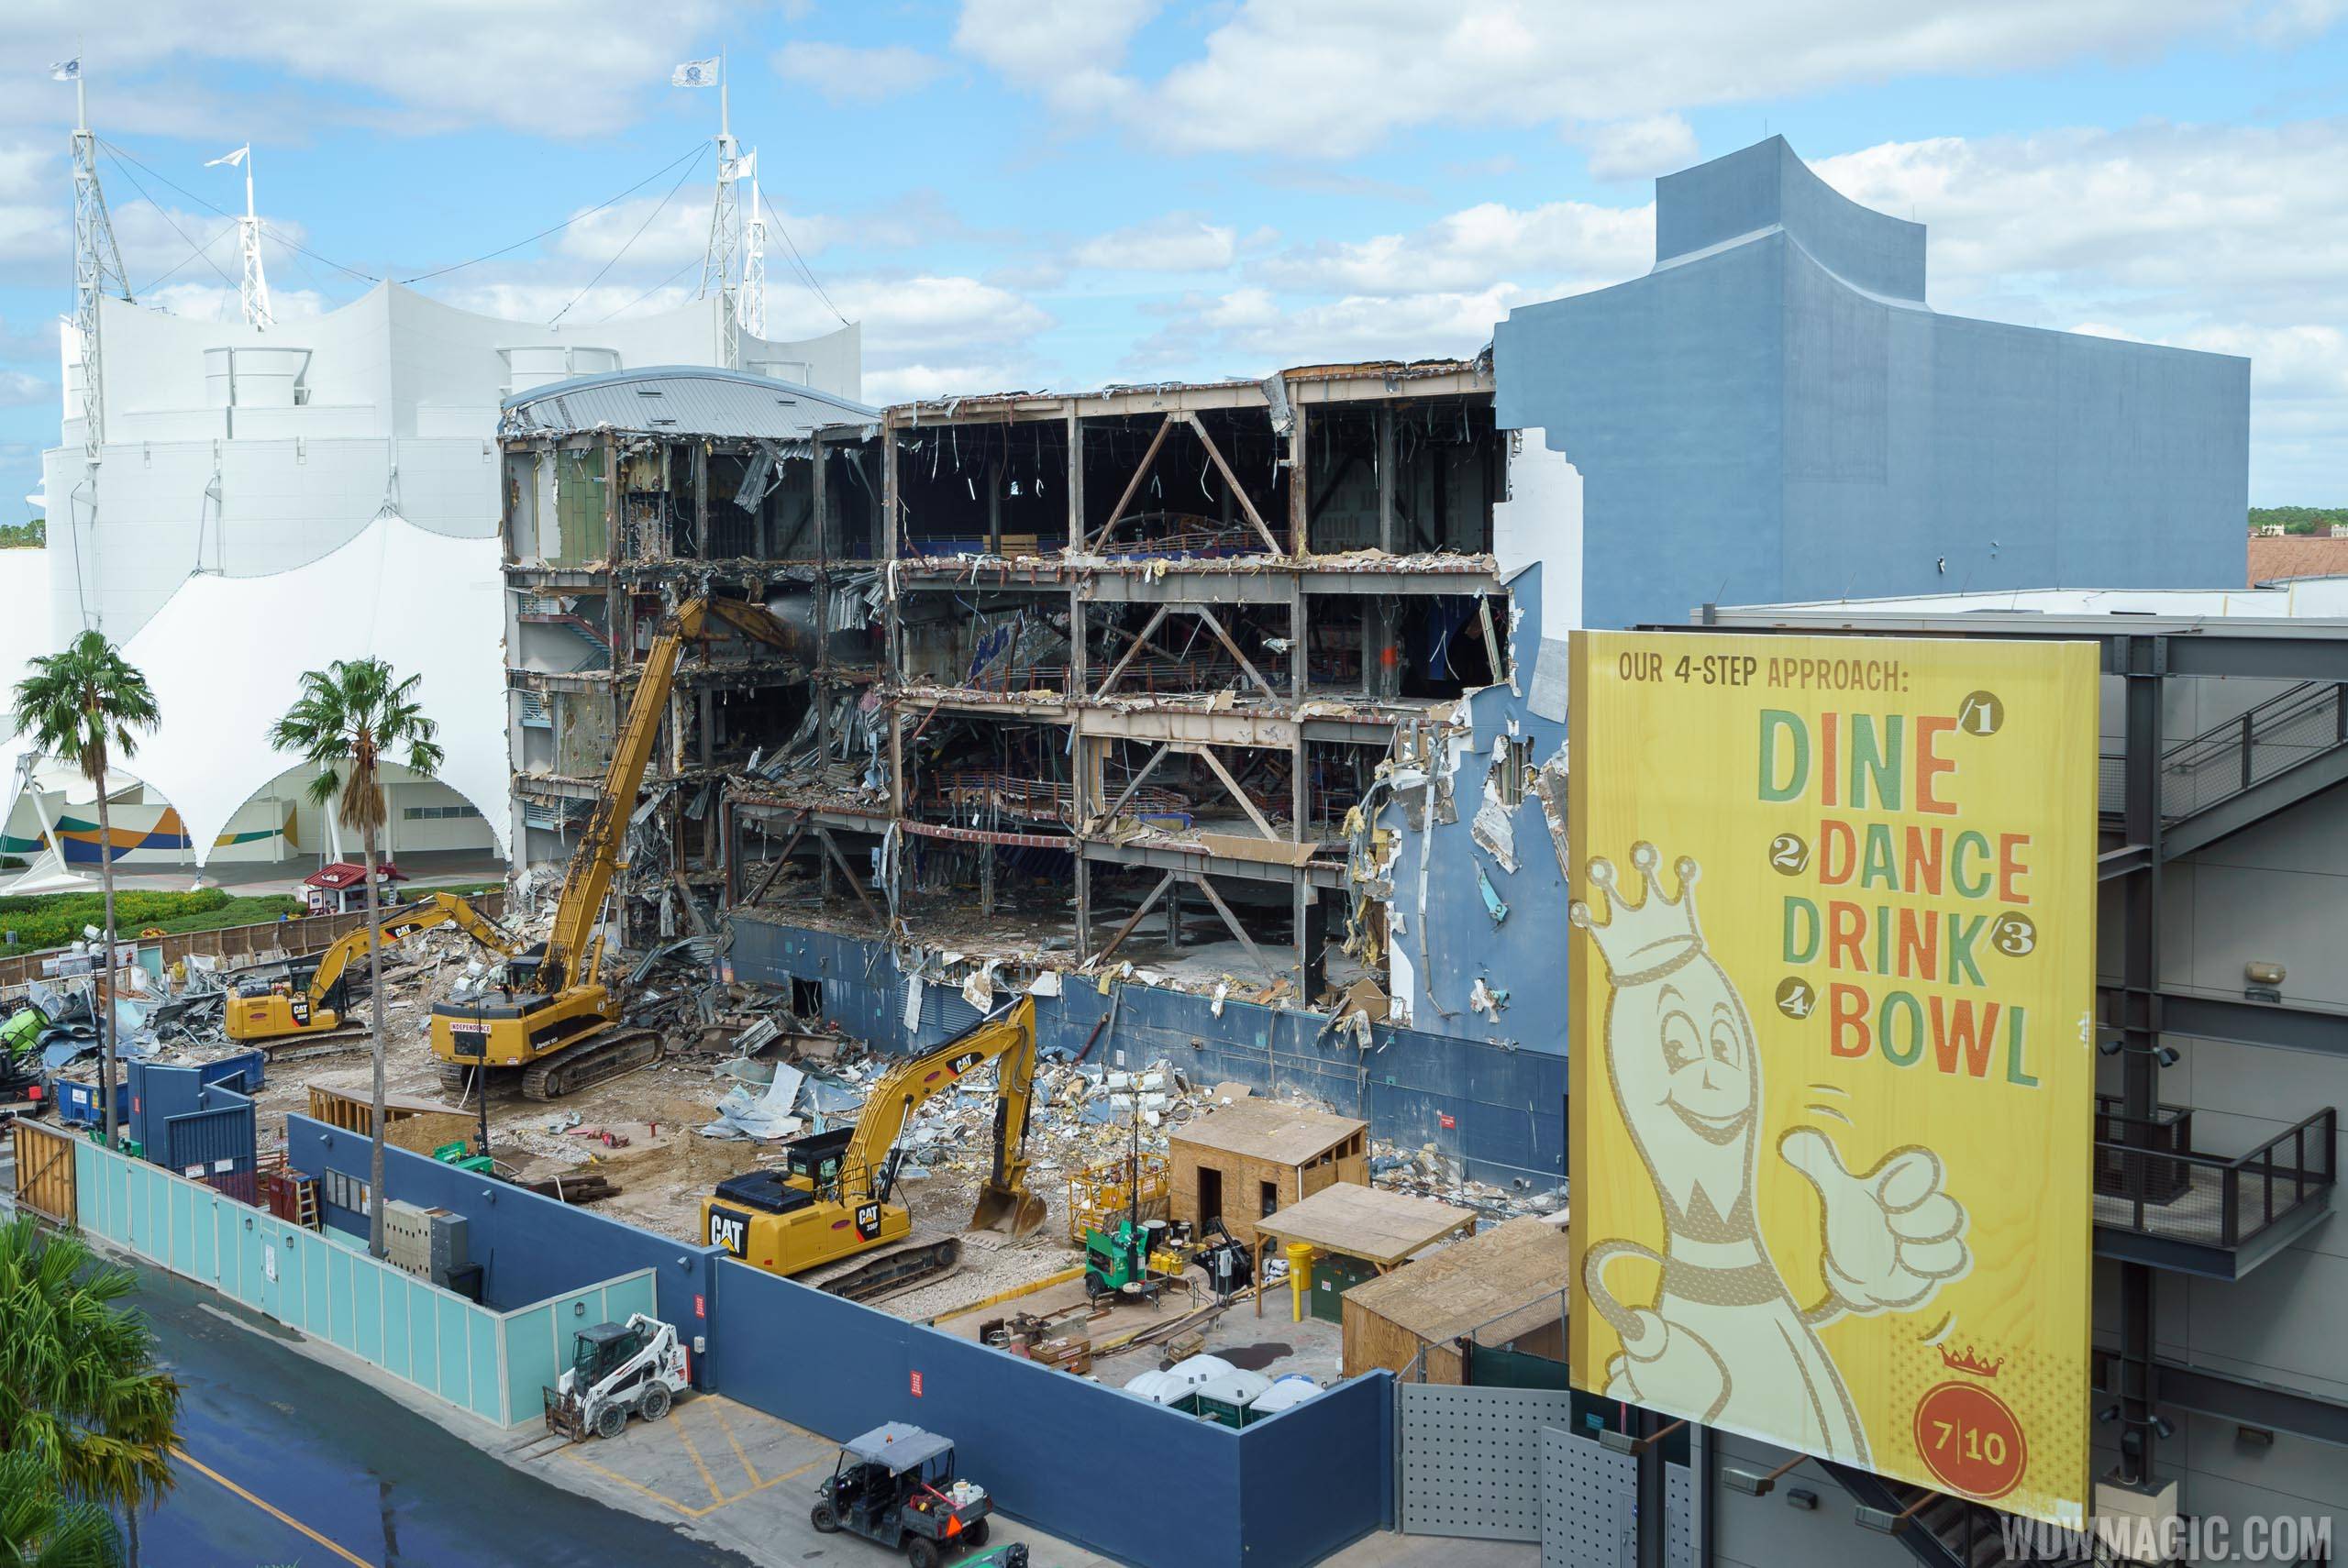 PHOTOS - Large scale demolition now in progress at the former Disney Quest